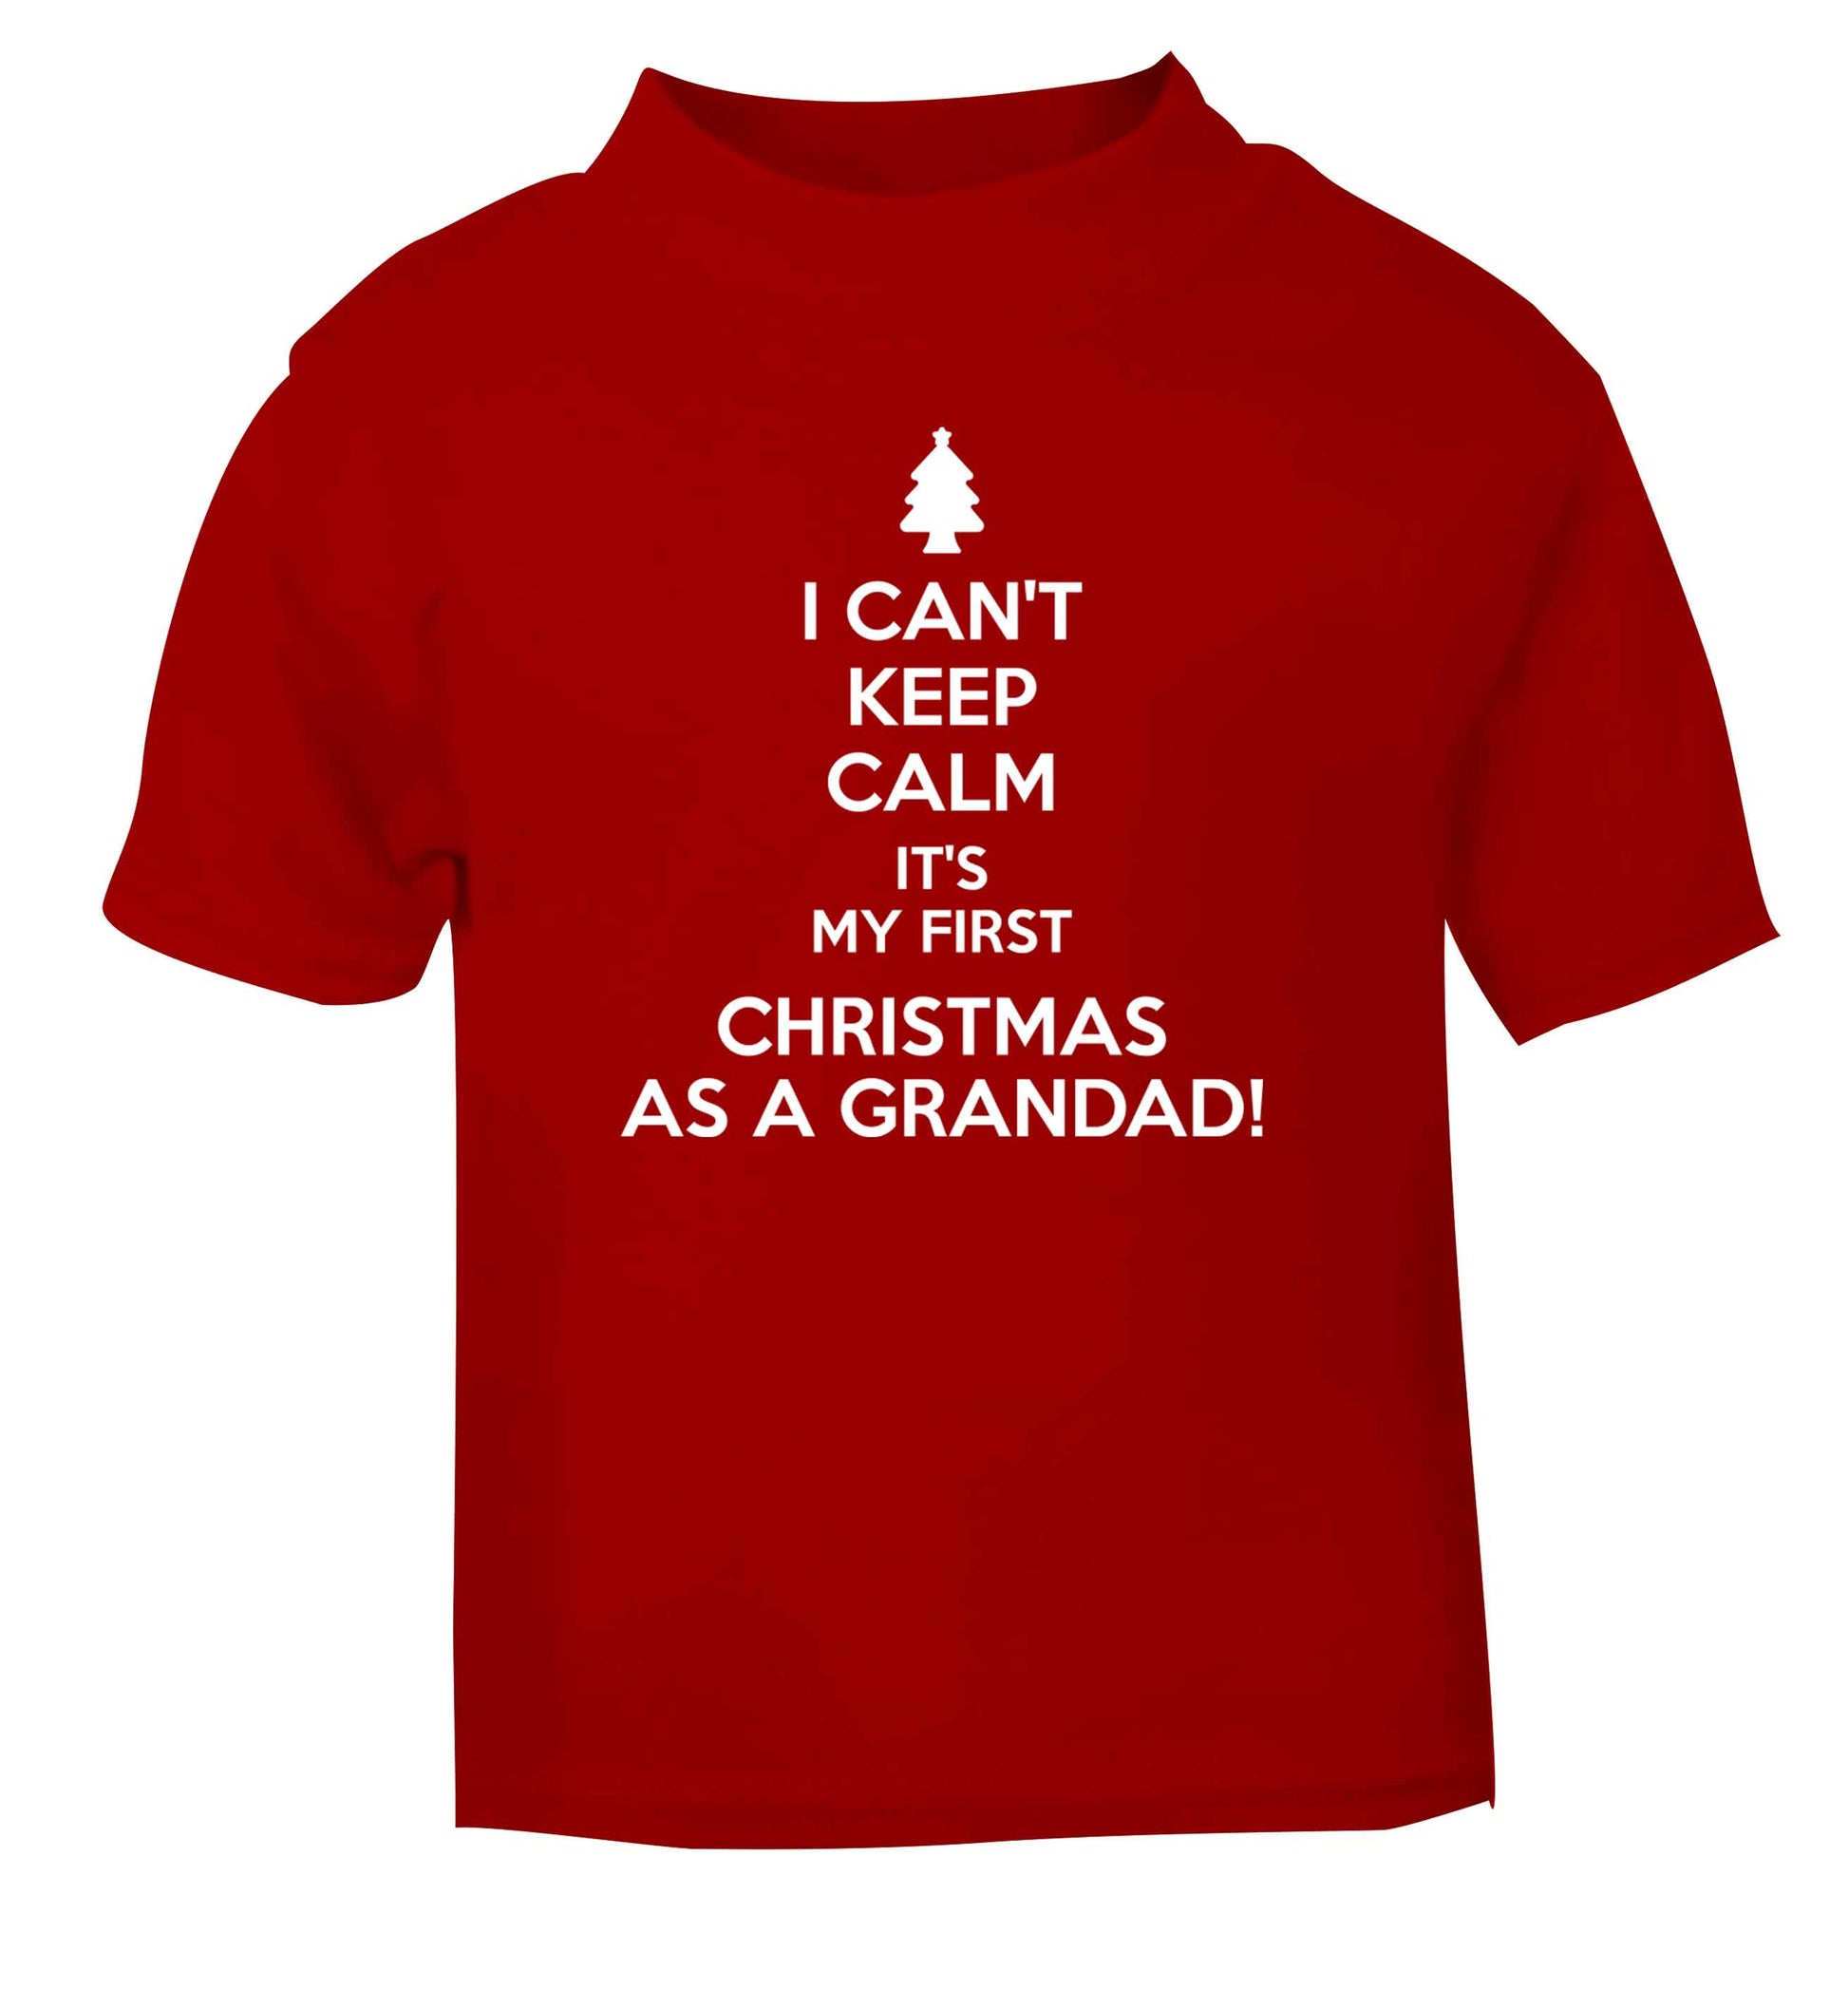 I can't keep calm it's my first Christmas as a grandad! red Baby Toddler Tshirt 2 Years